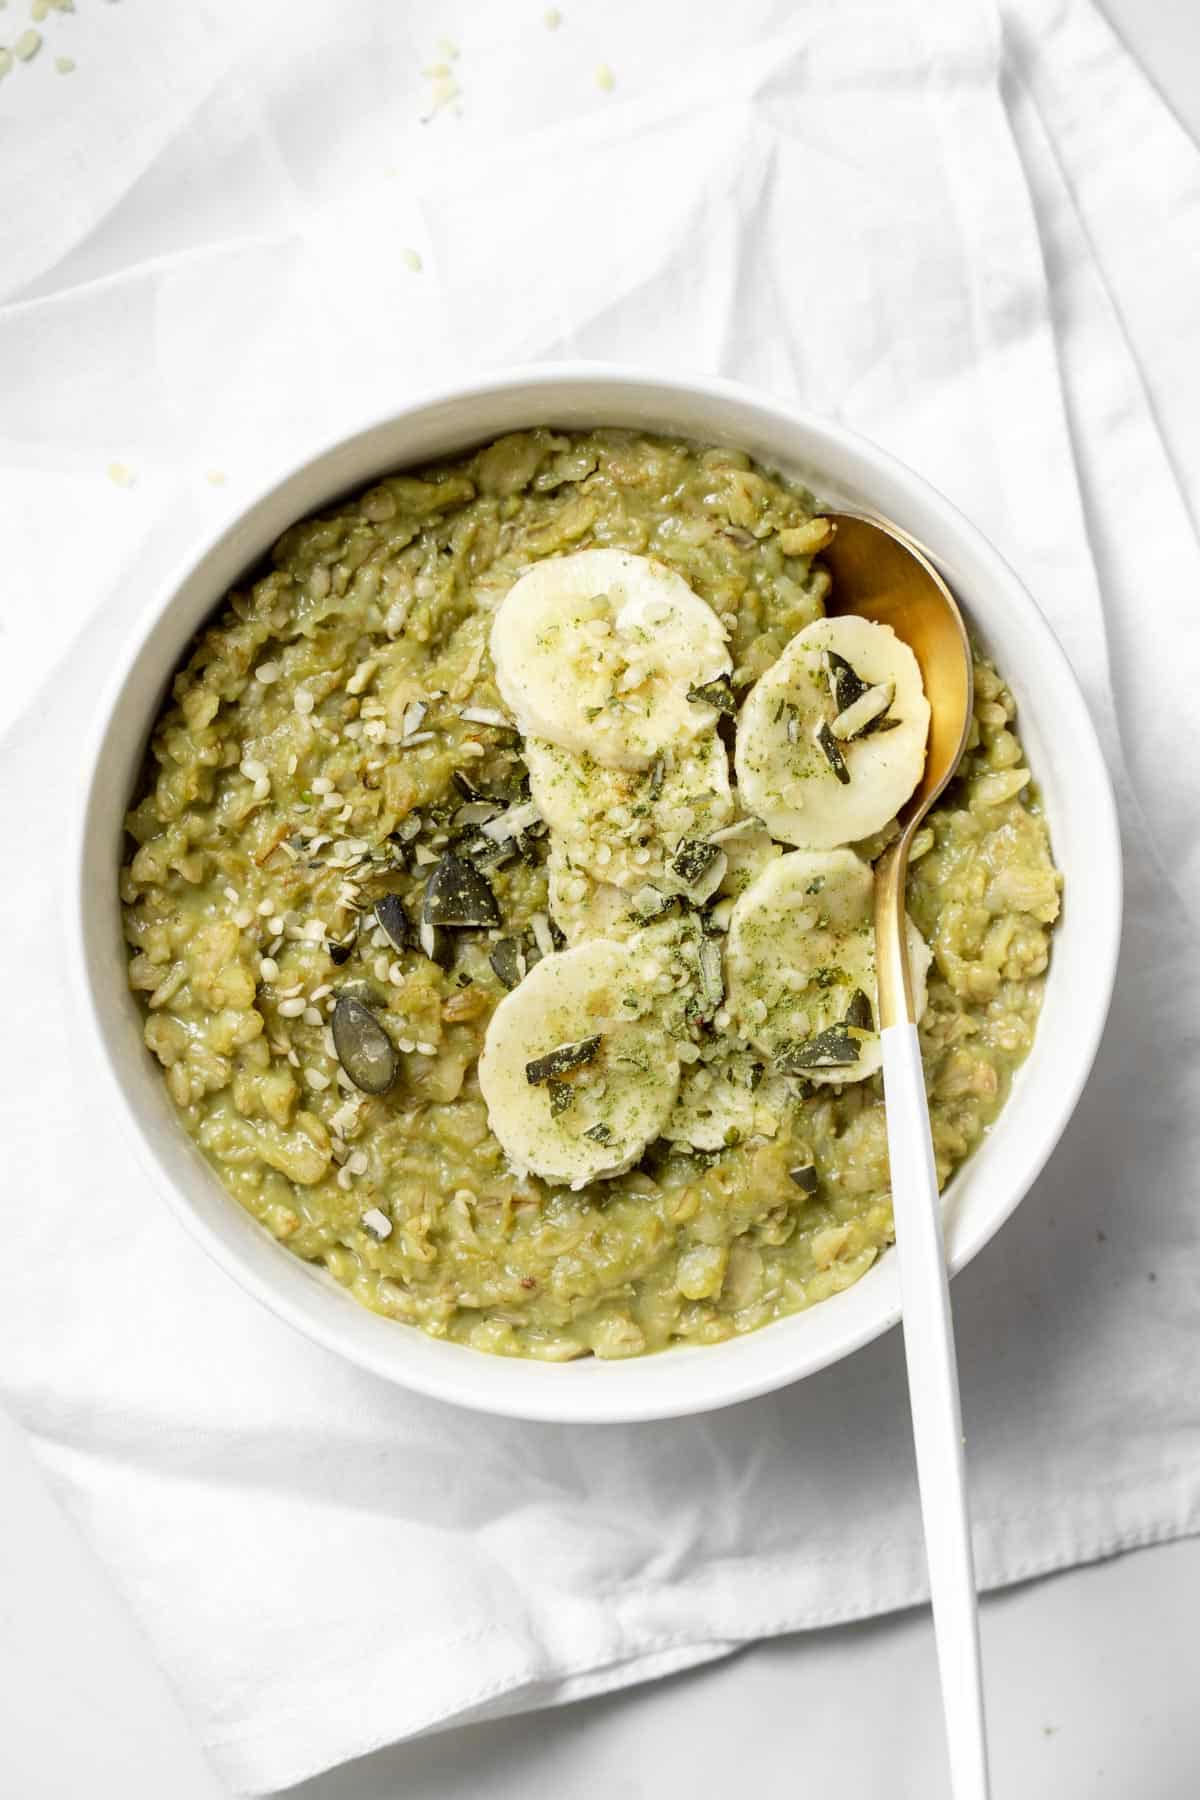 Overhead view of a bowl of matcha oatmeal with sliced bananas and a spoon tucked in.